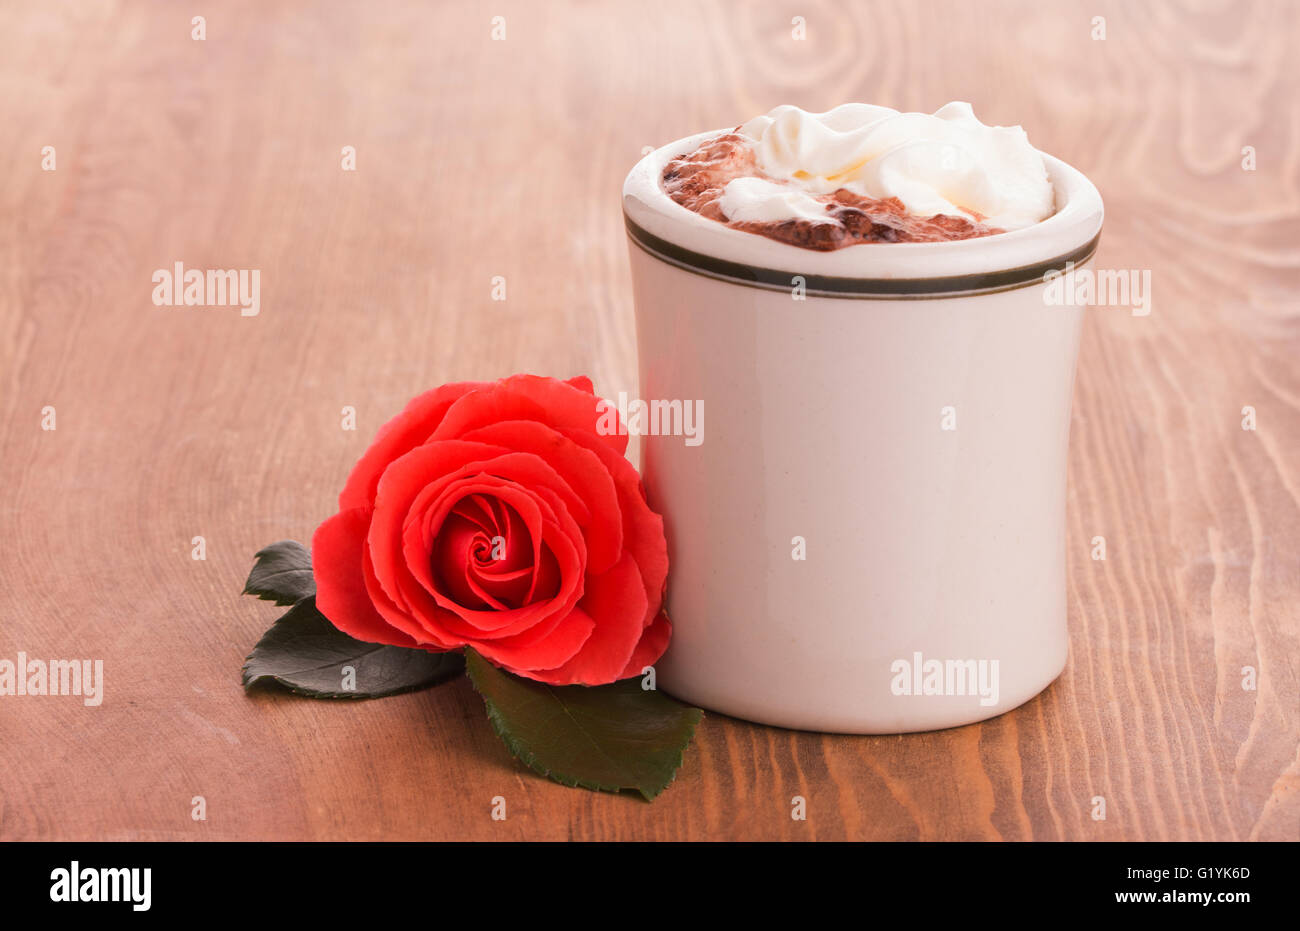 Romantic red rose with a cup of hot chocolate on wooden table - concept of a sweet gesture Stock Photo